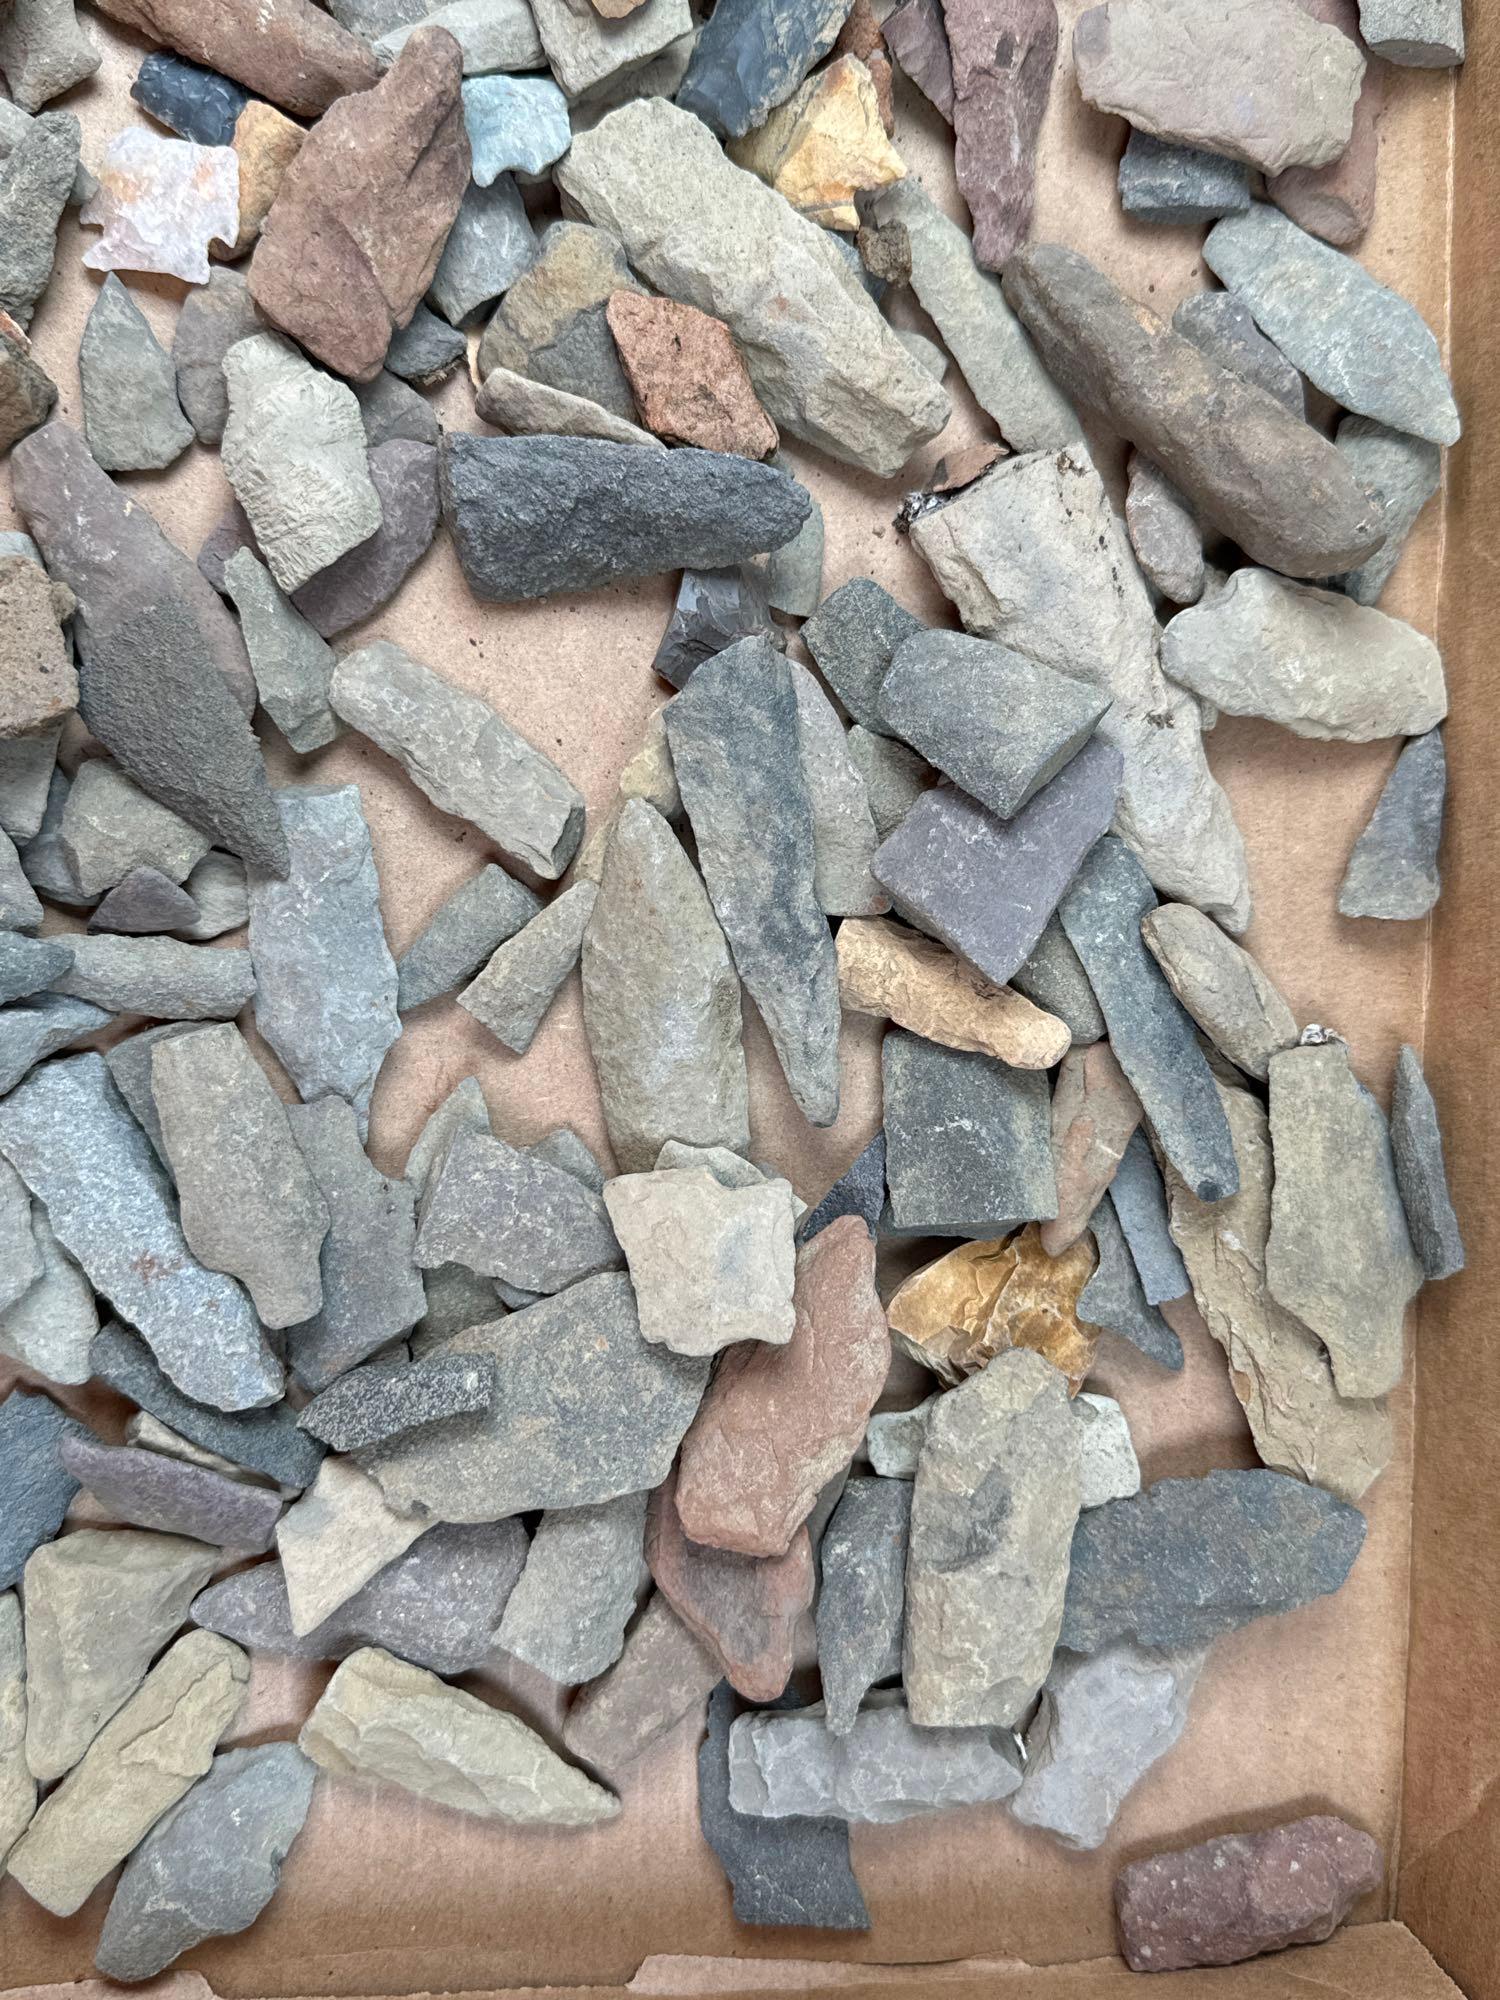 Large Box Lot of Site Material, Broken Points and Artifacts, Found in Mantua, Gloucester Co., NJ